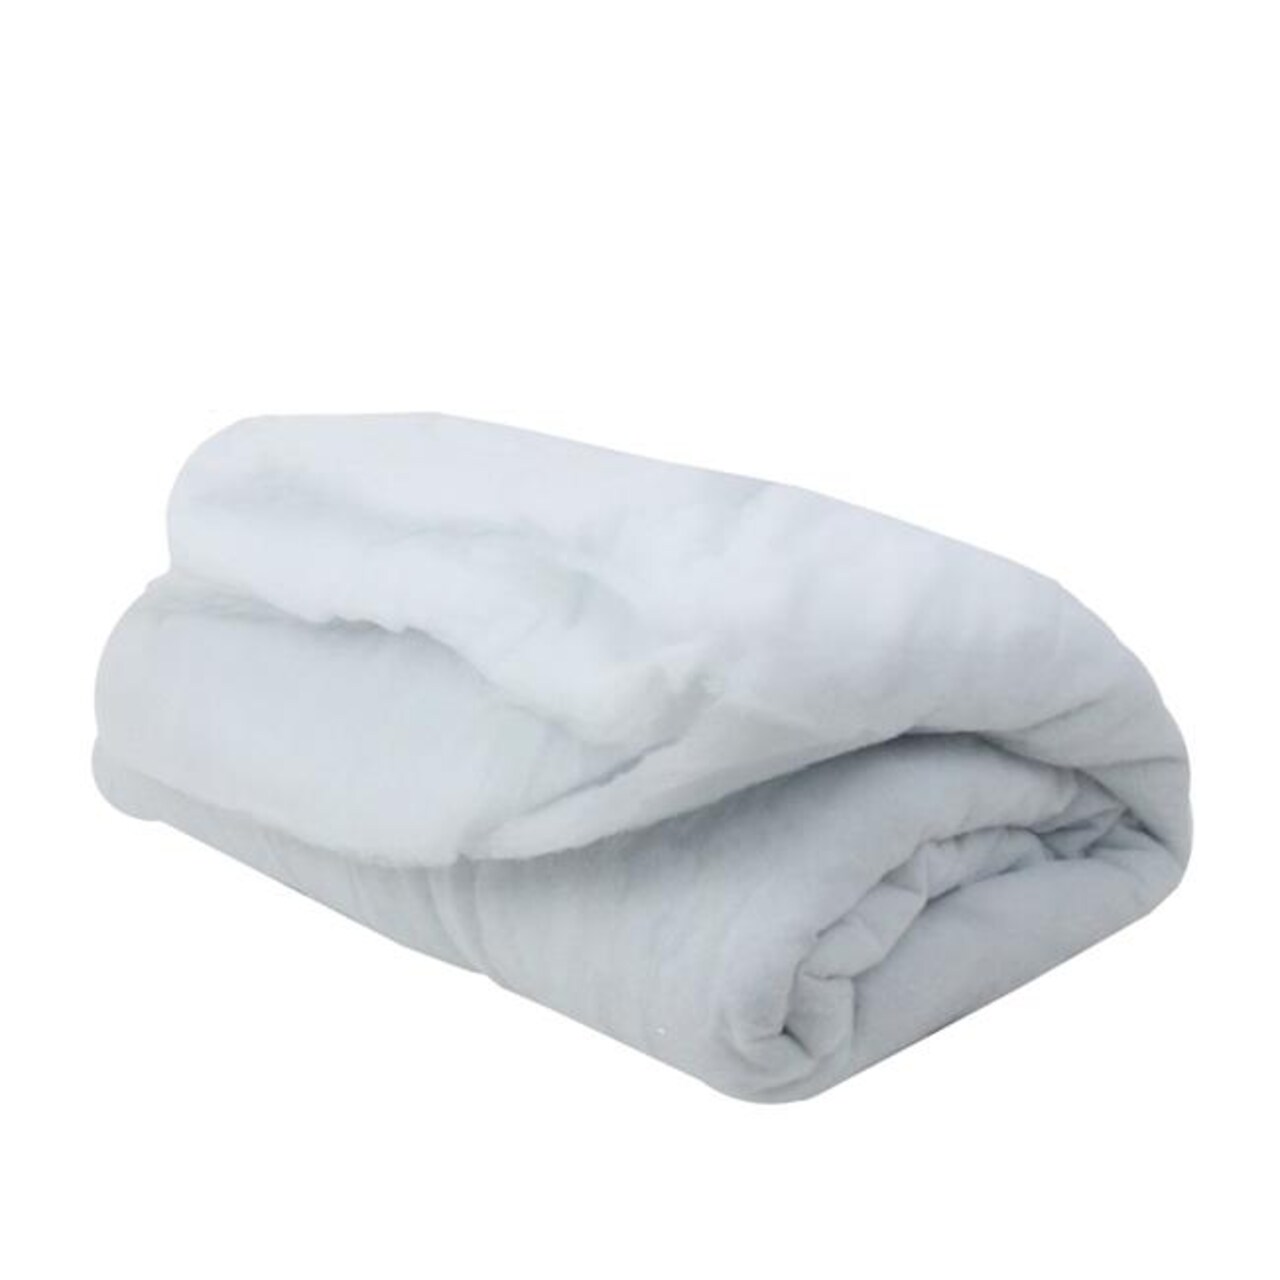 Northlight 32911692 8.25 ft. x 45 in. Solid White Artificial Soft Snow Christmas Craft Blanket